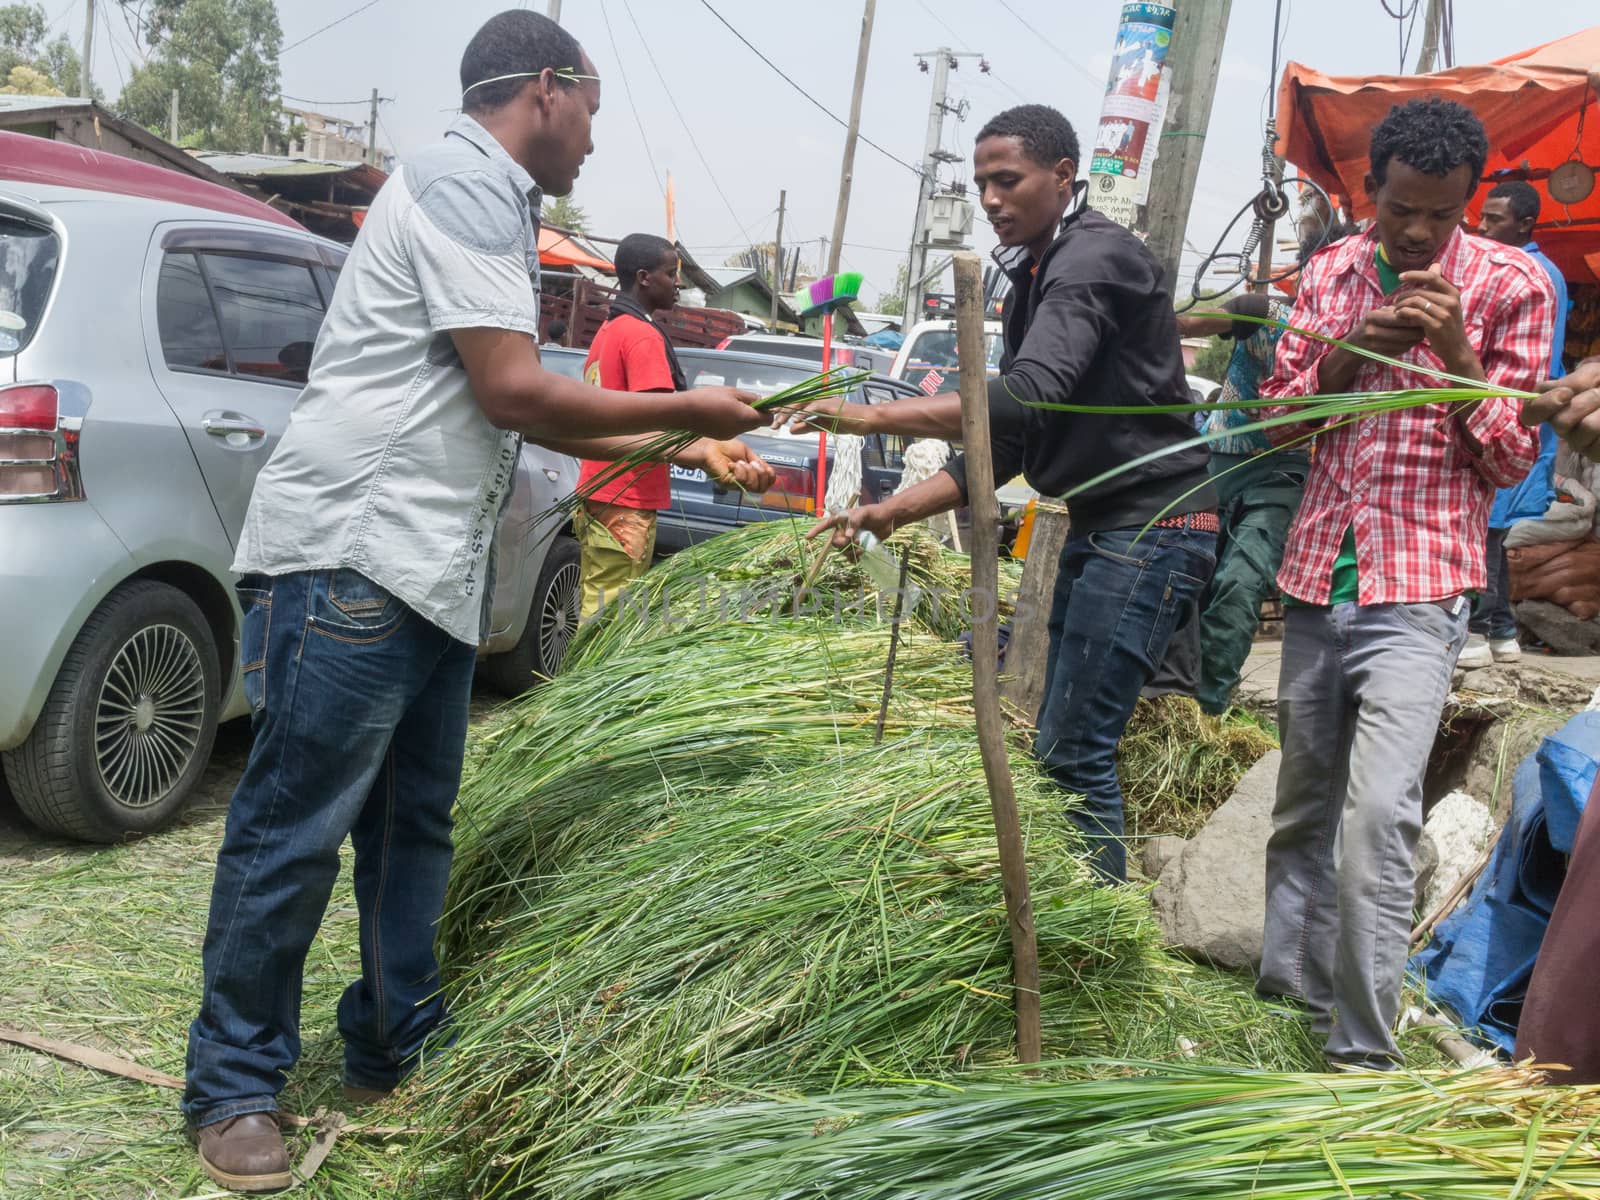 Addis Ababa: April 11: Freshly cut grass which used for decorating floors during the holidays available for sale at a local market during Easter eve on April 11, 2015 in Addis Ababa, Ethiopia